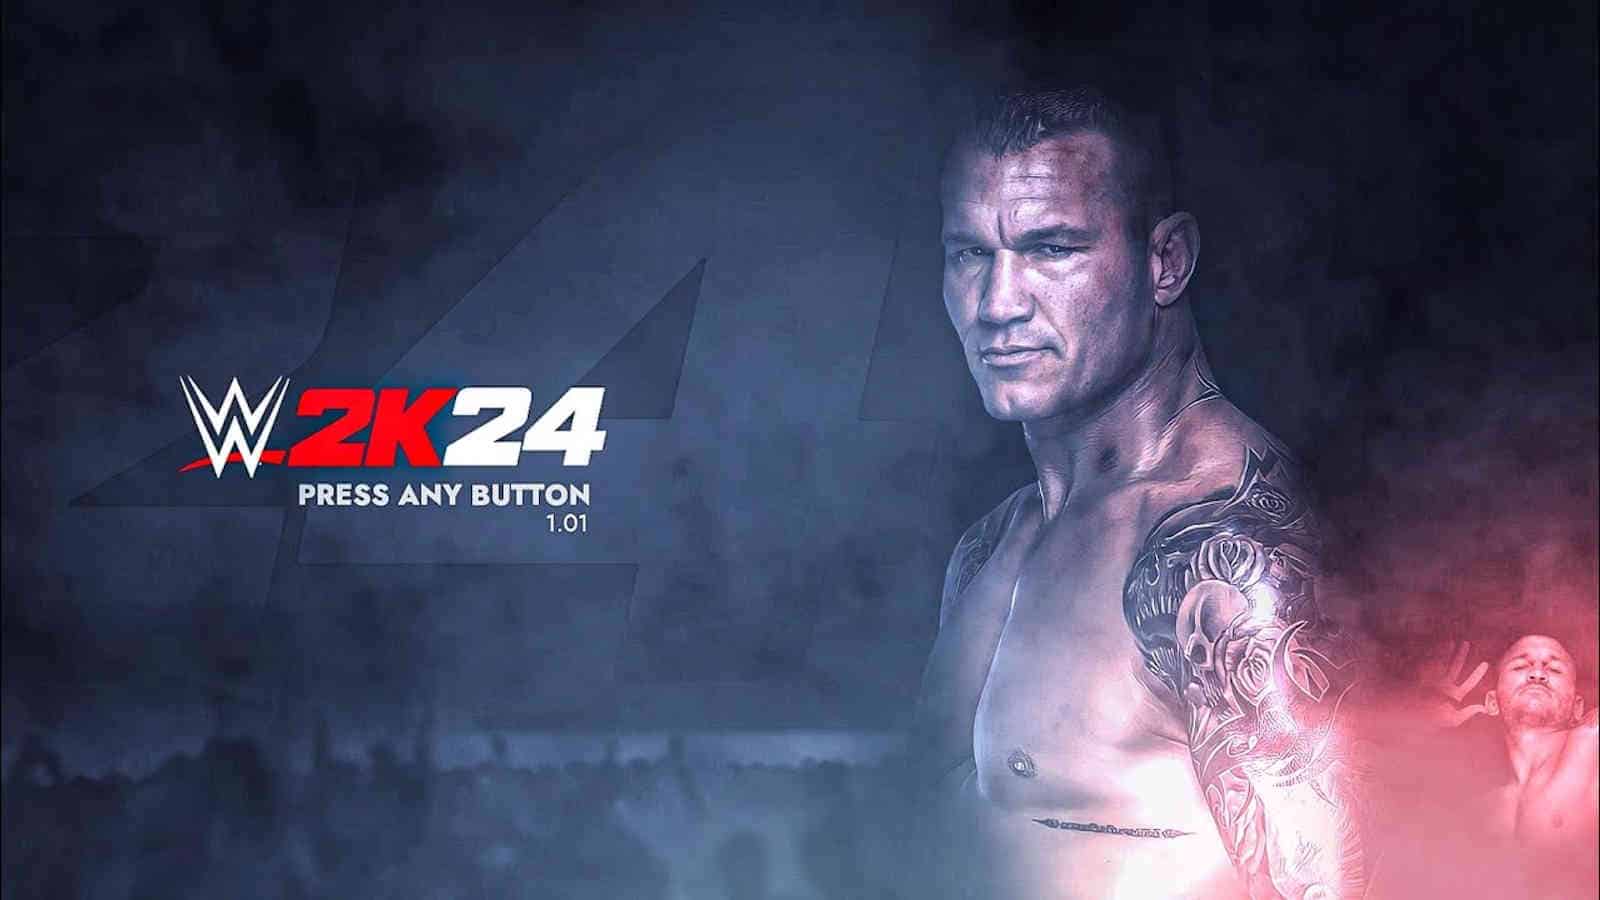 WWE 2K24 game release